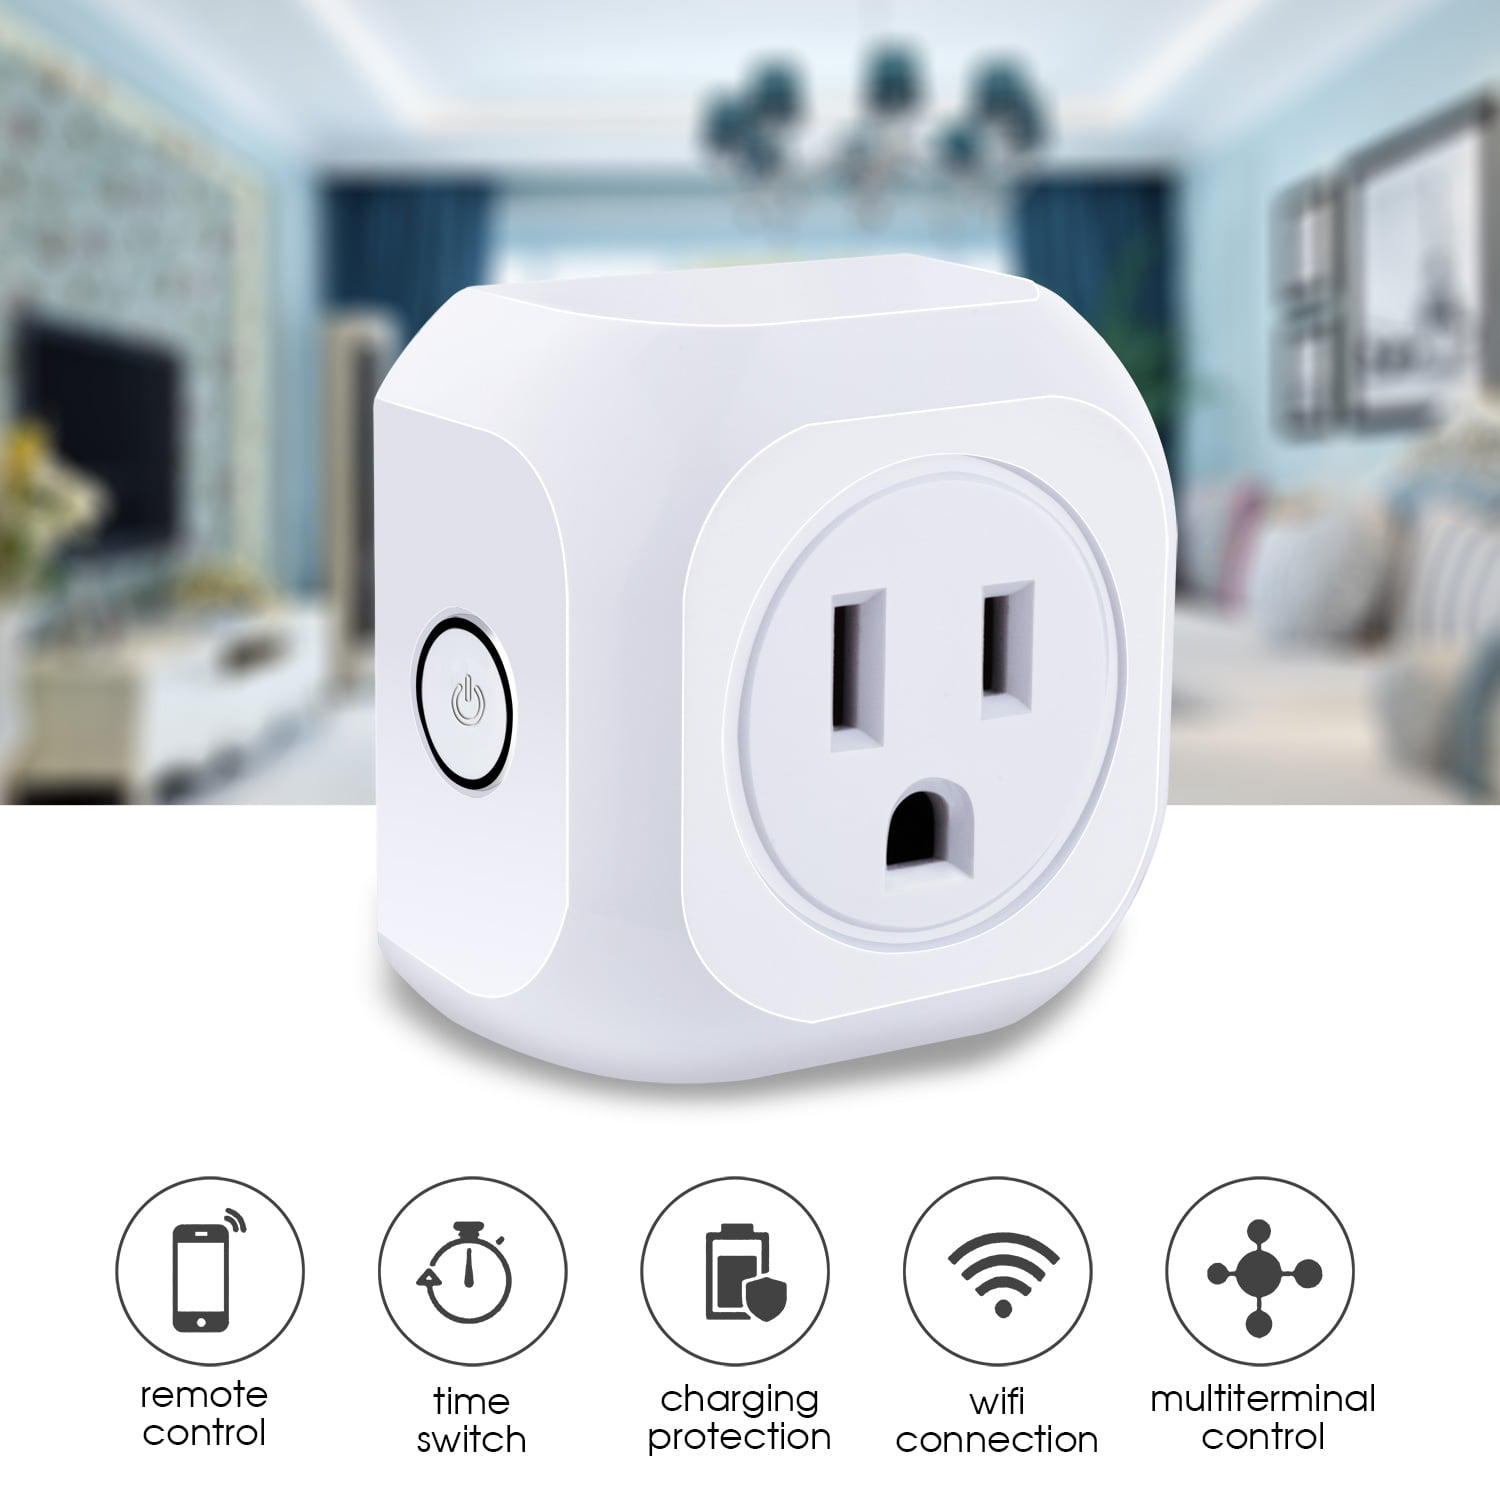 Mini 1 Pack Control Your Electrical Devices from Anywhere WiFi Enabled Remote Cont No Hub Required DRHLWZN 15A Mini Smart Plug Timing Function Outlet Compatible with  Alexa Google Home IFTTT 